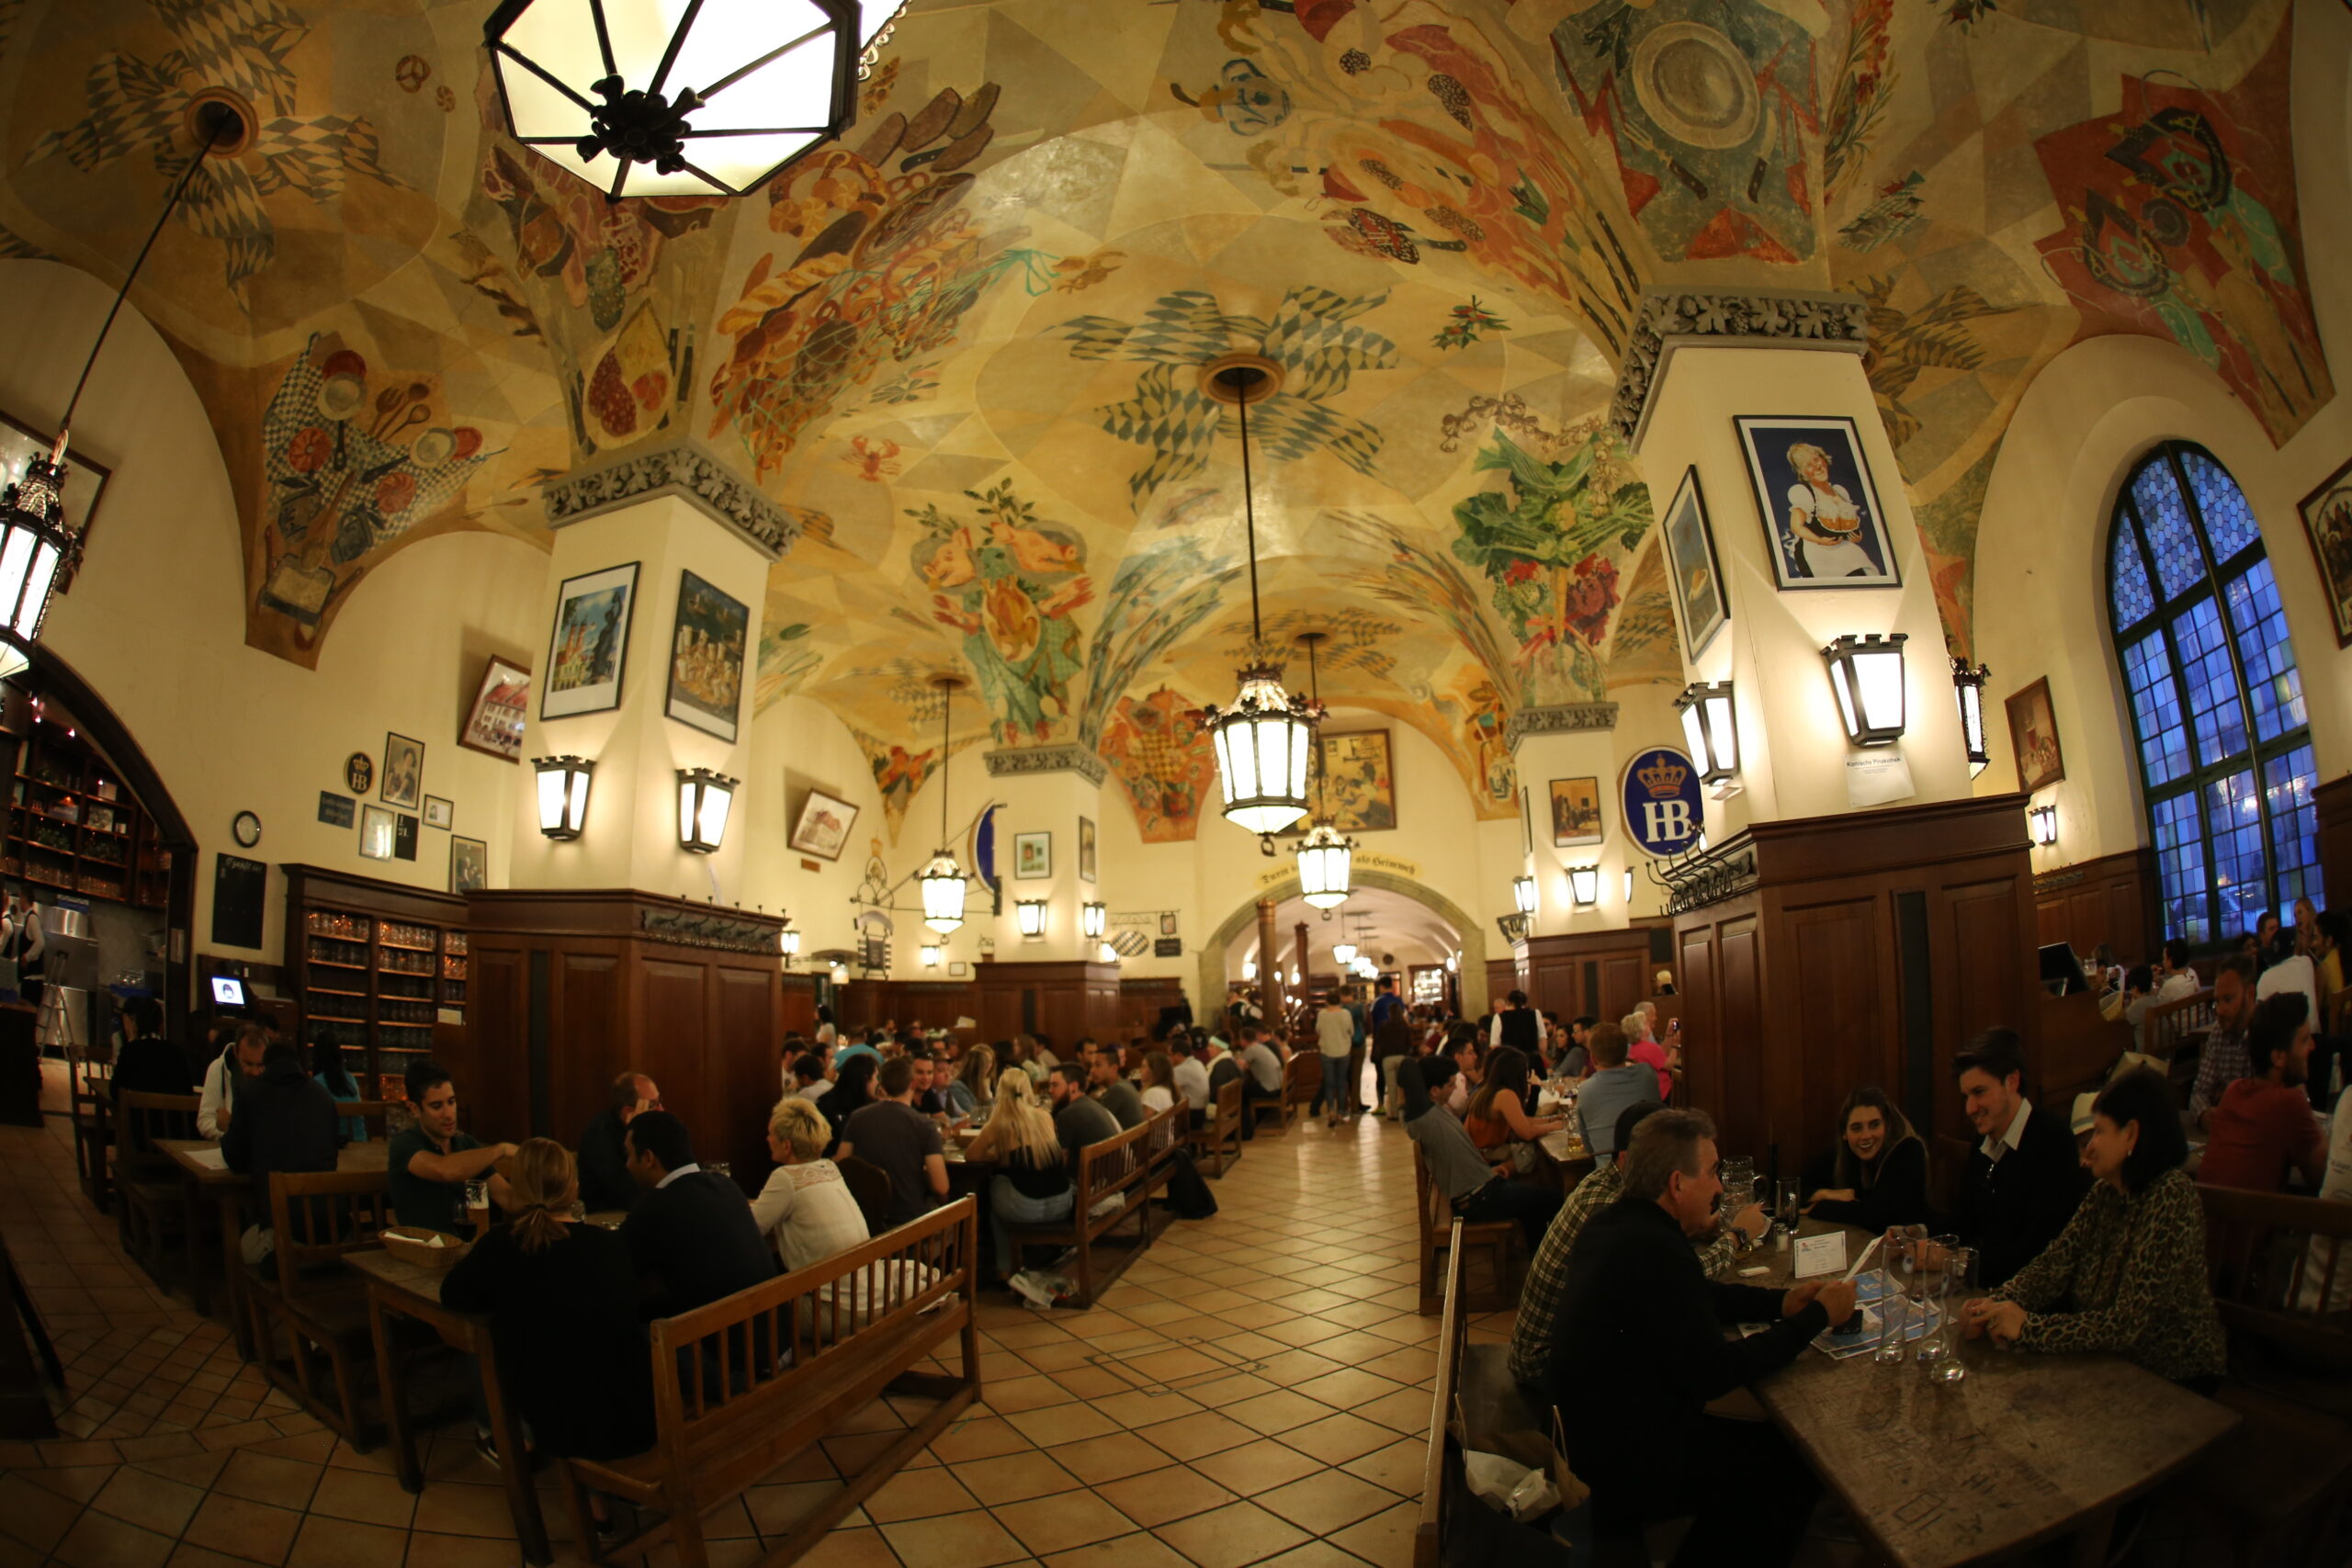 Hofbräuhaus Munich, an iconic beer hall with a rich history